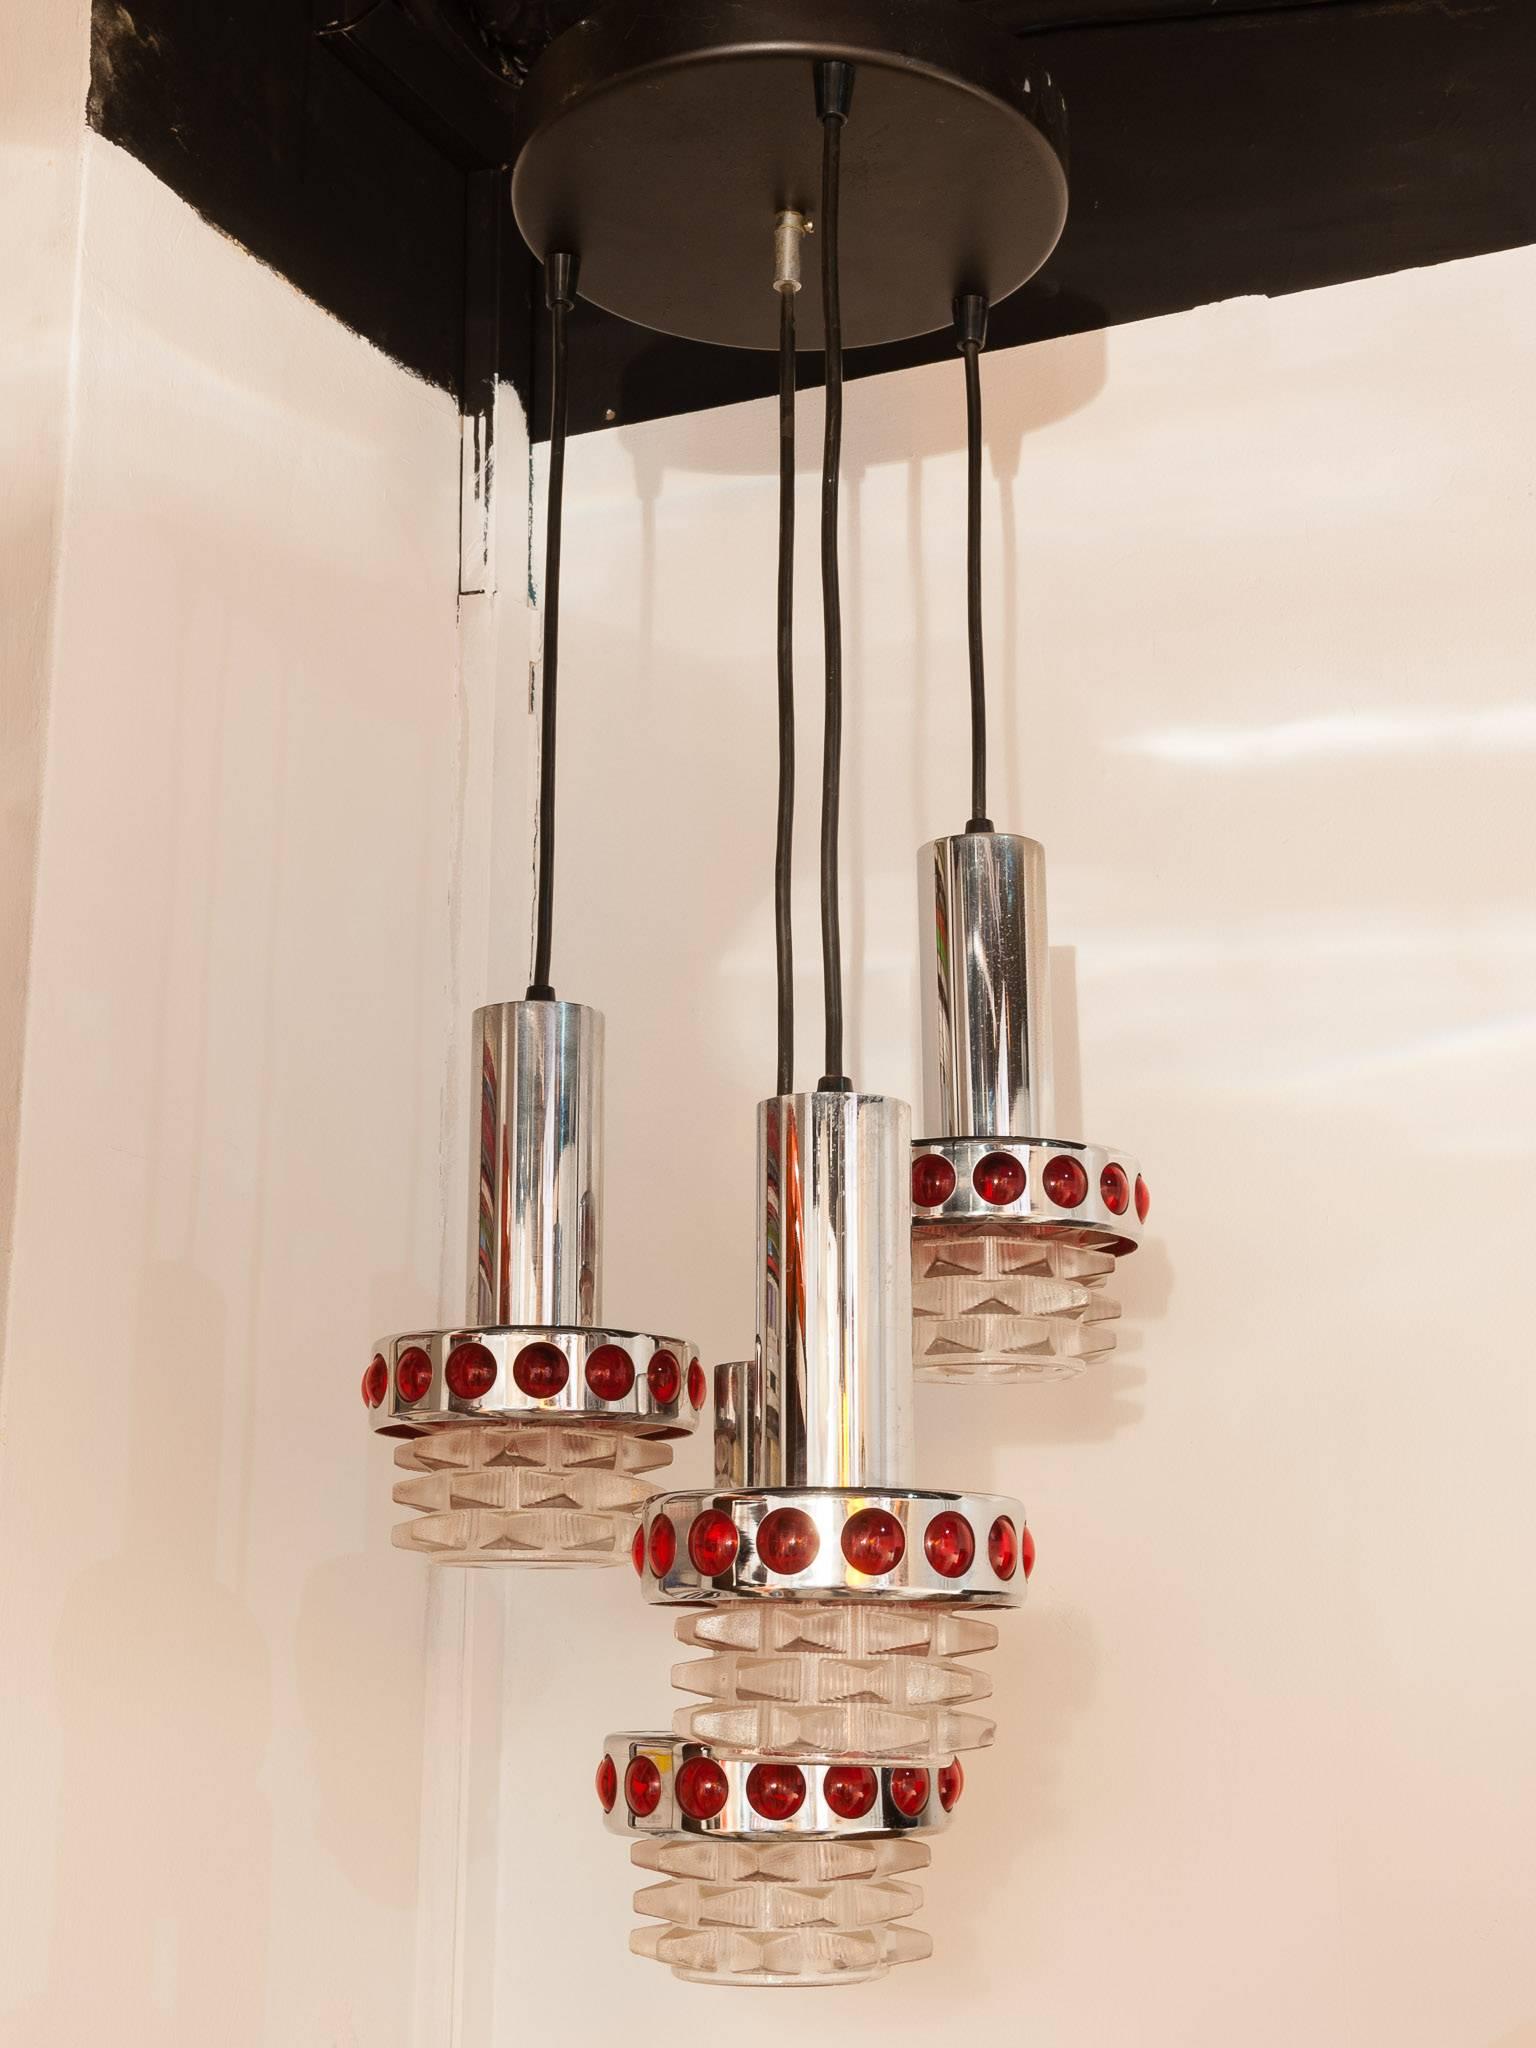 1970s Midcentury RAAK chrome hanging light with ruby red circular spotted decoration. The lamp has four shades which hang from a circular black metal disc ceiling plate which fixes to the ceiling. The shades are formed from glass, chrome and red